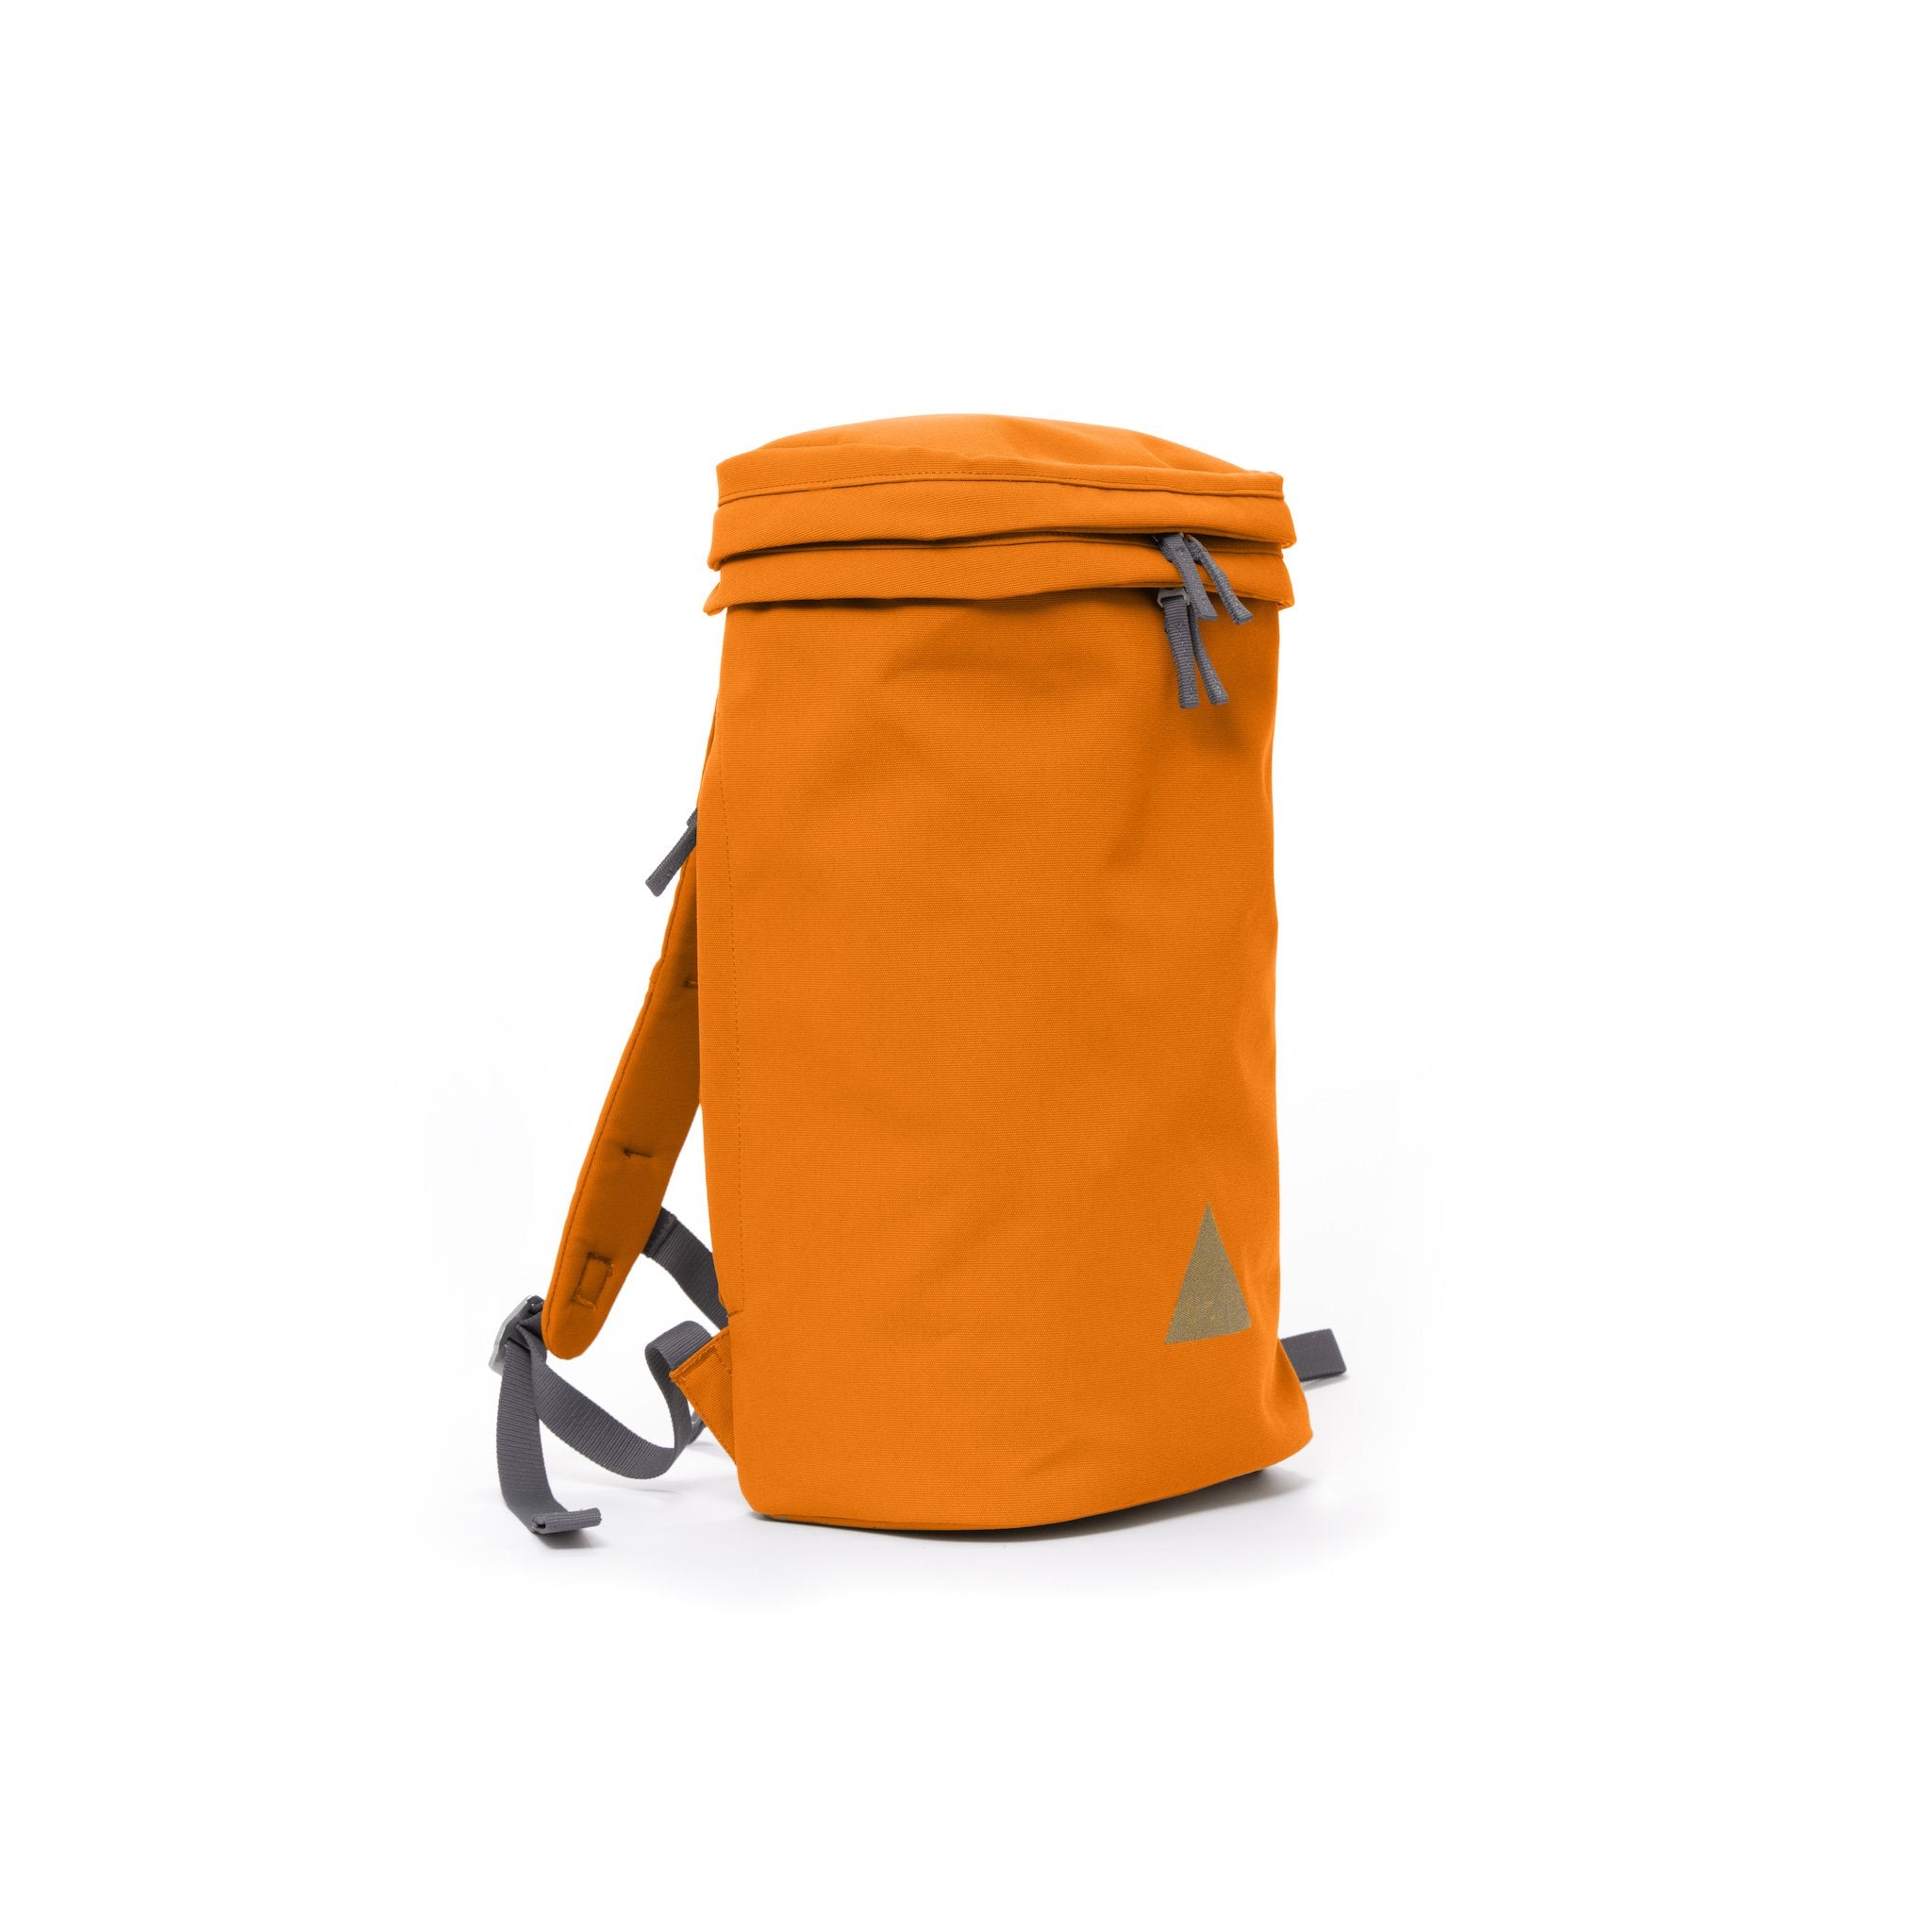 Orange canvas backpack with padded shoulder straps and triangle logo.